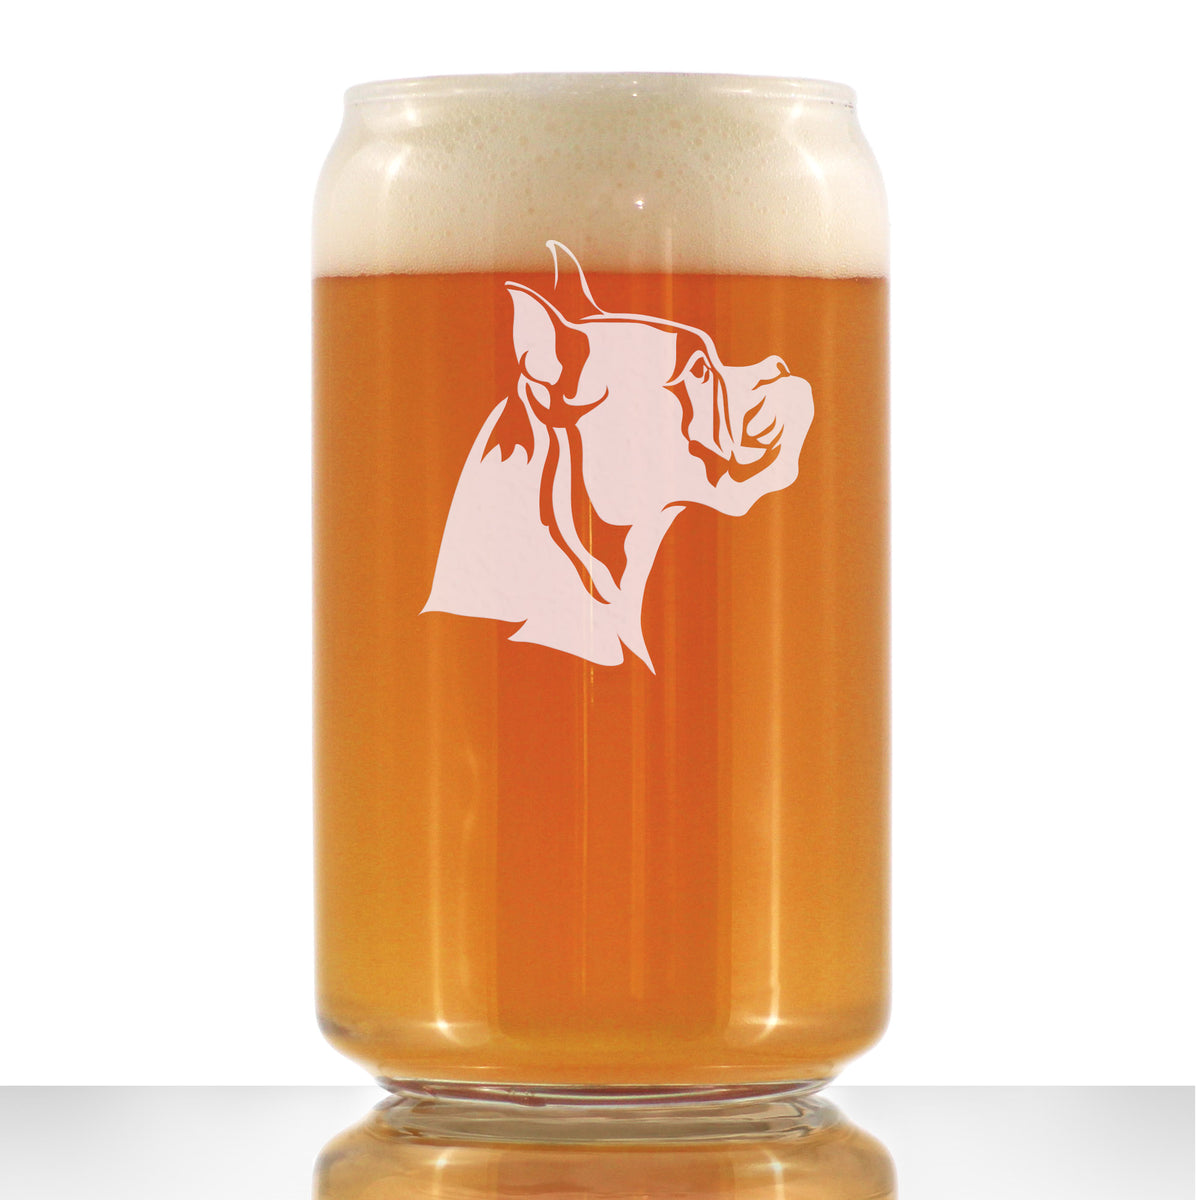 Boxer with Pointed Ears - Beer Can Pint Glass - Fun Unique Boxer Themed Dog Gifts and Party Decor for Women and Men - 16 oz